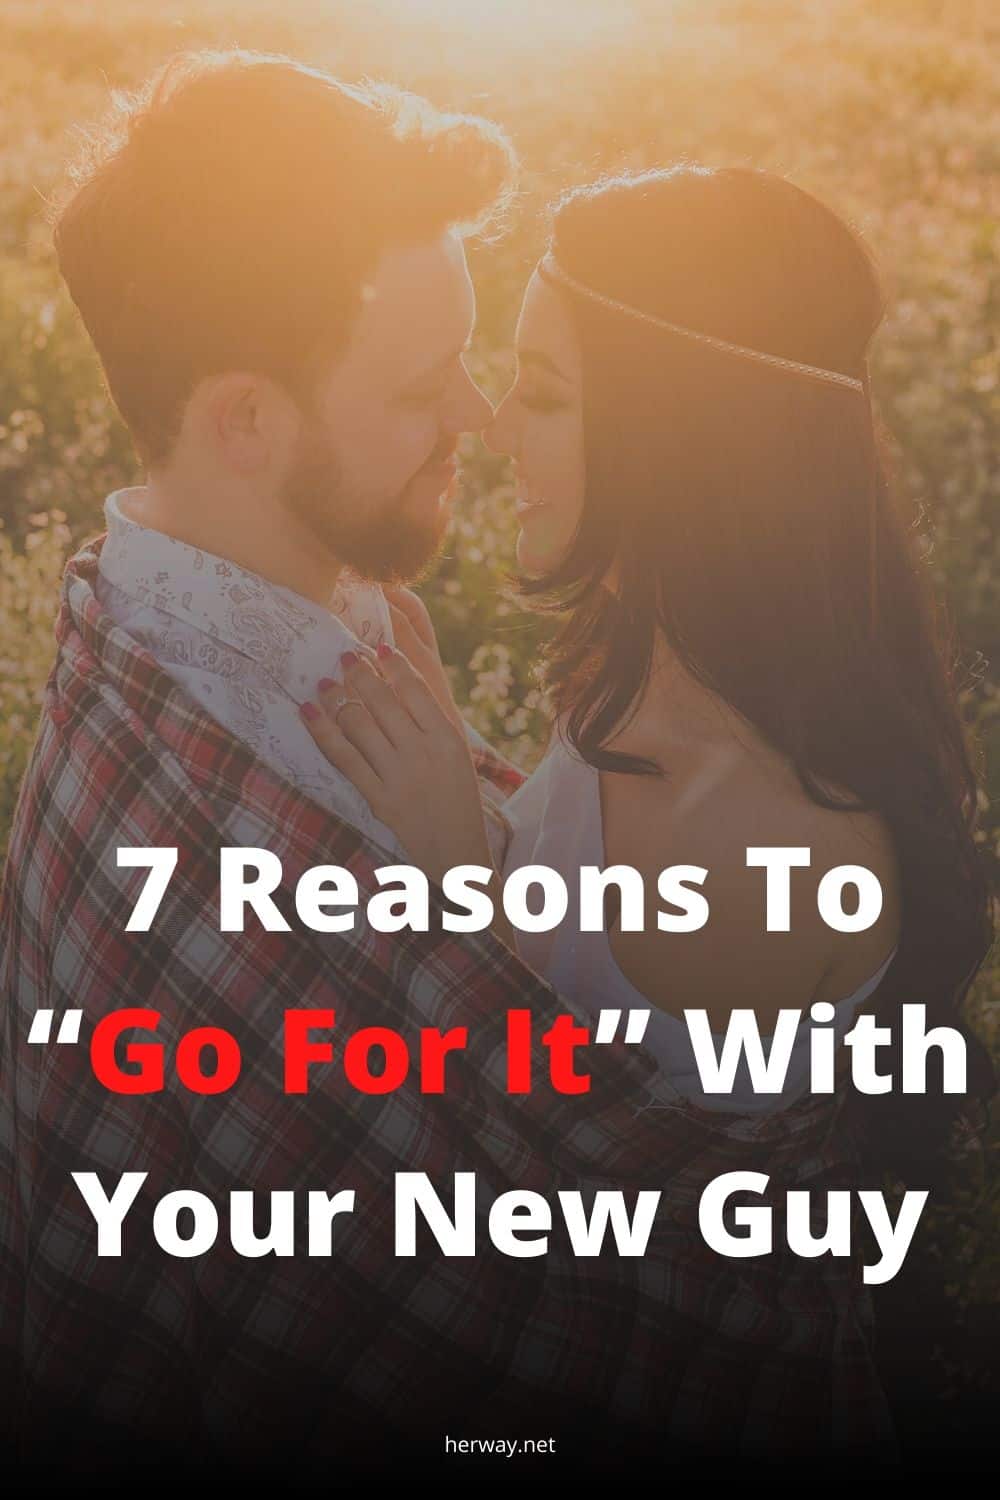 7 Reasons To “Go For It” With Your New Guy